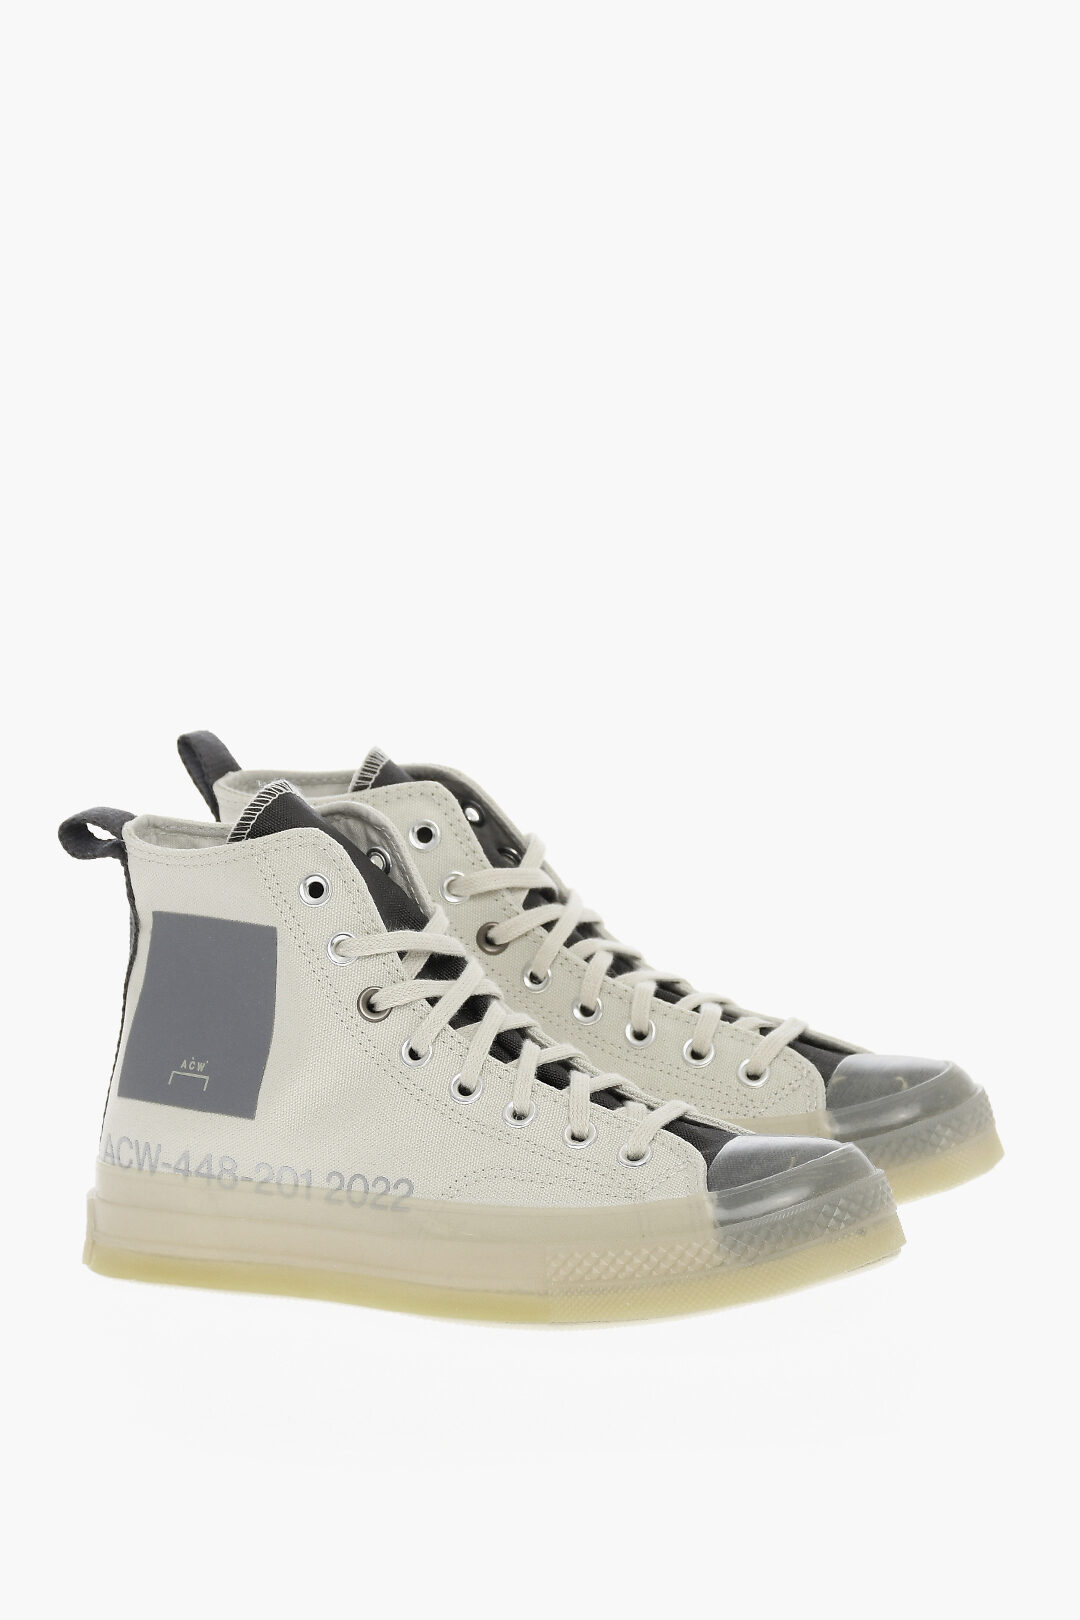 Converse A COLD WALL high-top CT70 Sneakers With Clear Sole men